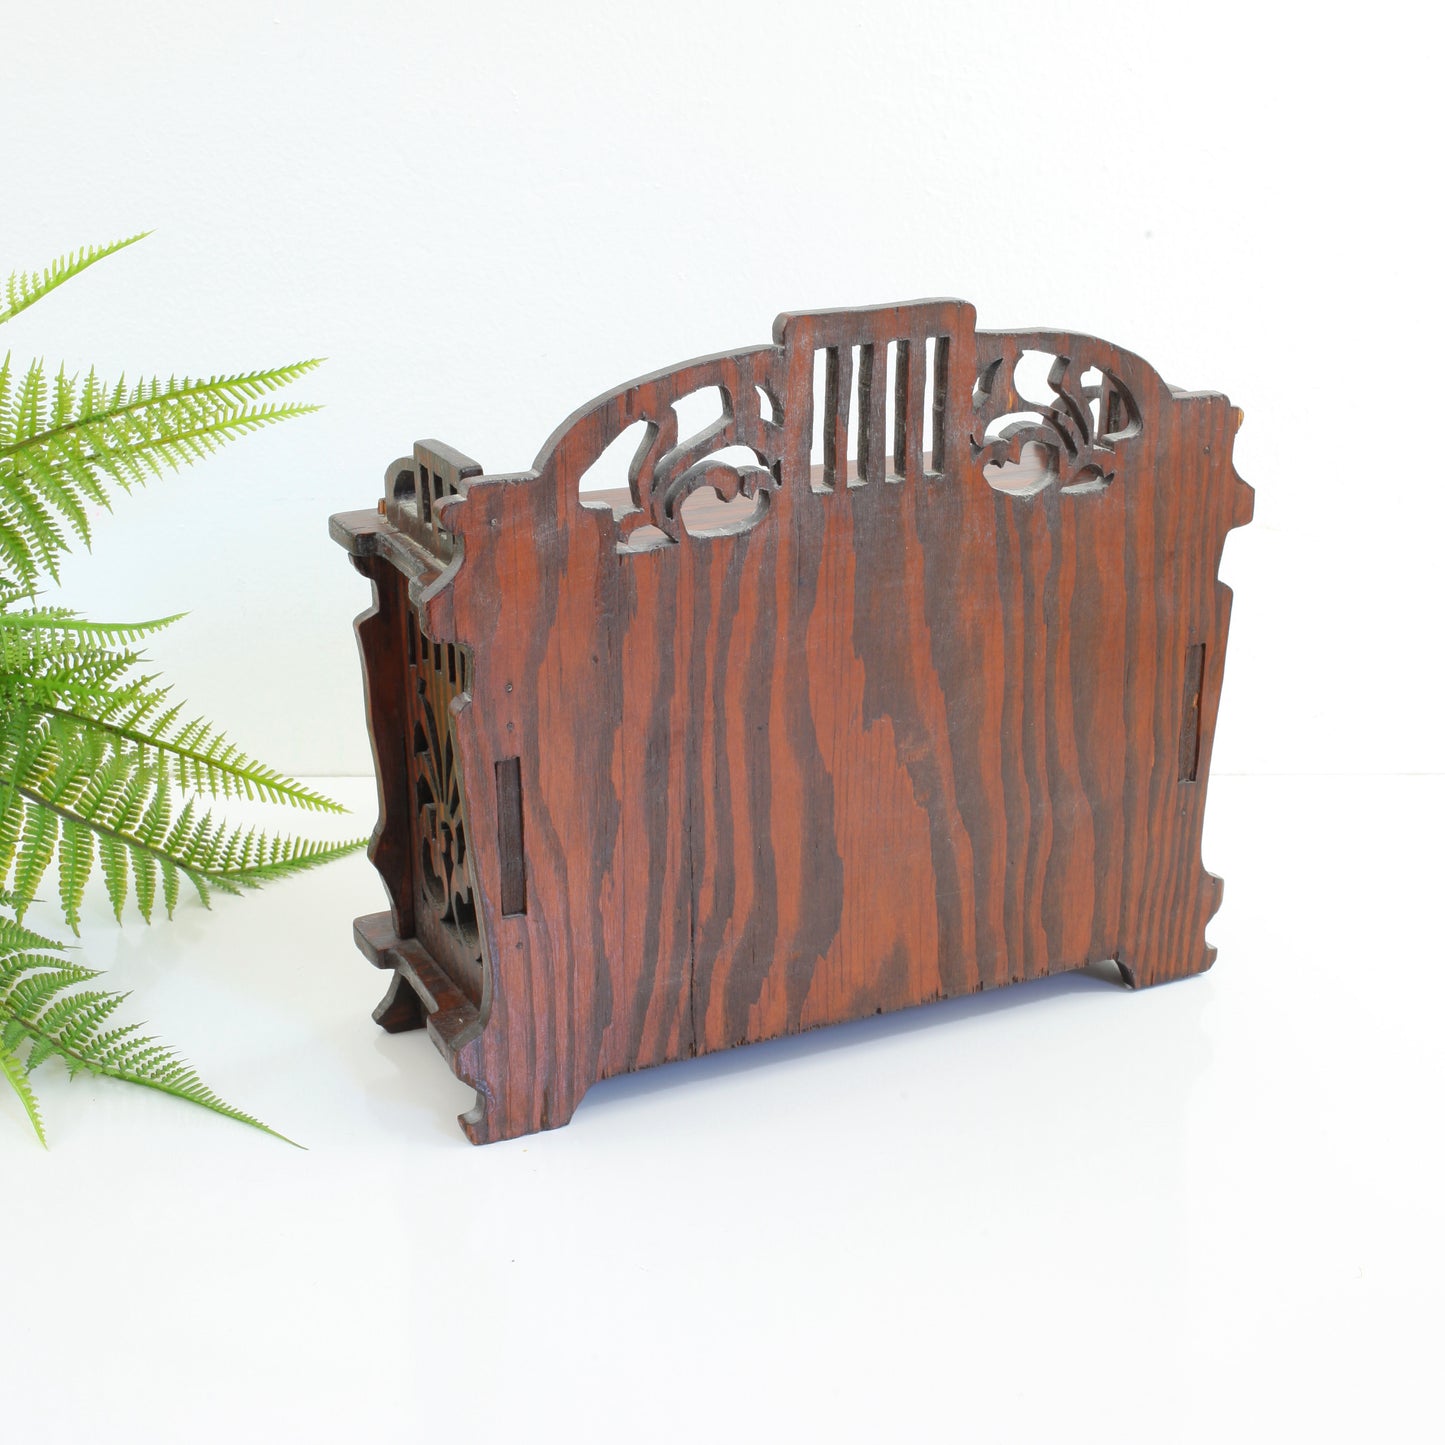 SOLD - Vintage Handmade Wooden Jewelry Box